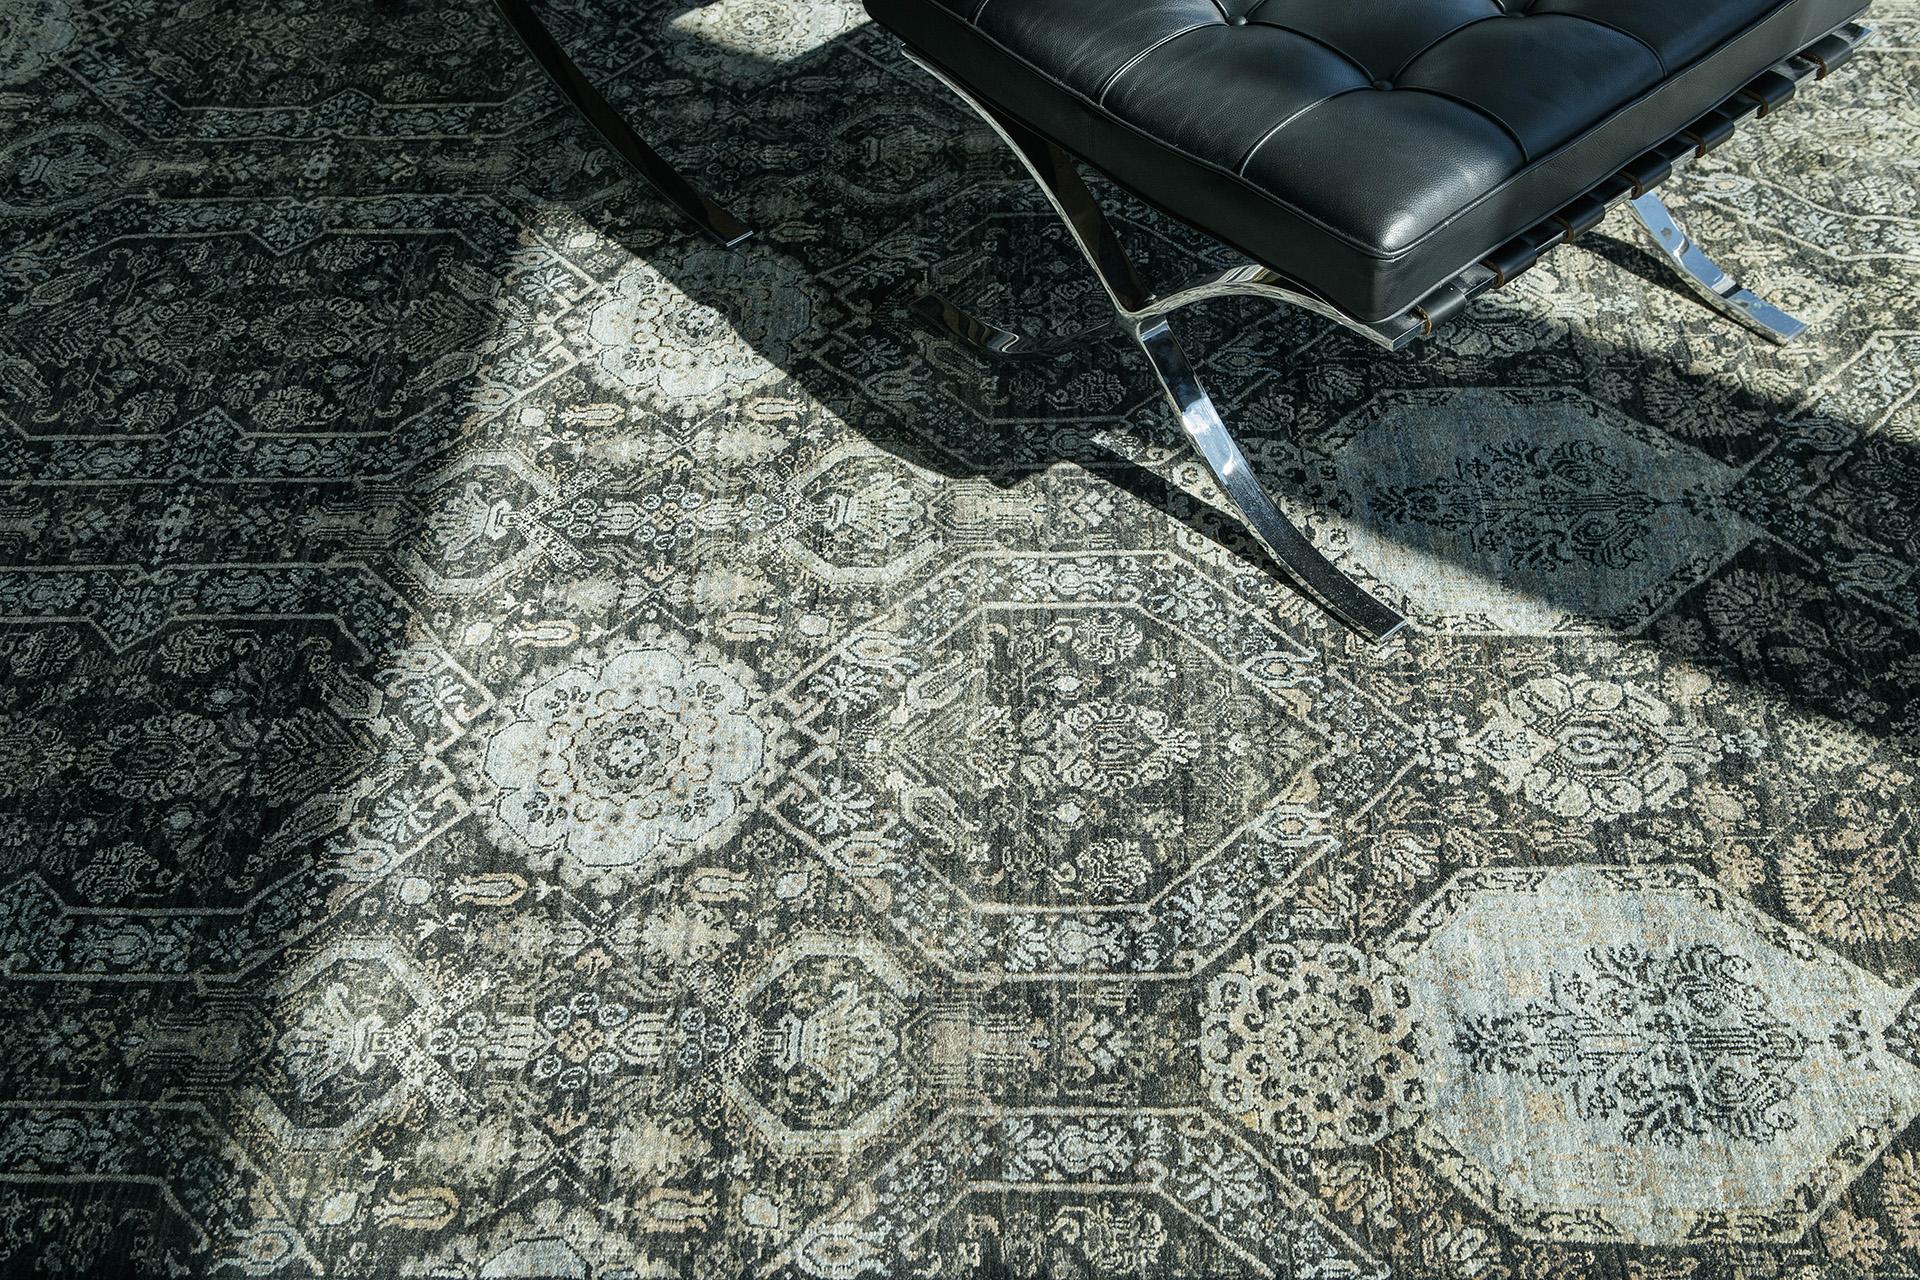 All-over design in deep grey, silver and pale coppery tones. The pattern features tile and medallion shapes elaborated with traditional palmettes, florals and embellishments. Abrash throughout creates a harmonizing effect.

Rug number: